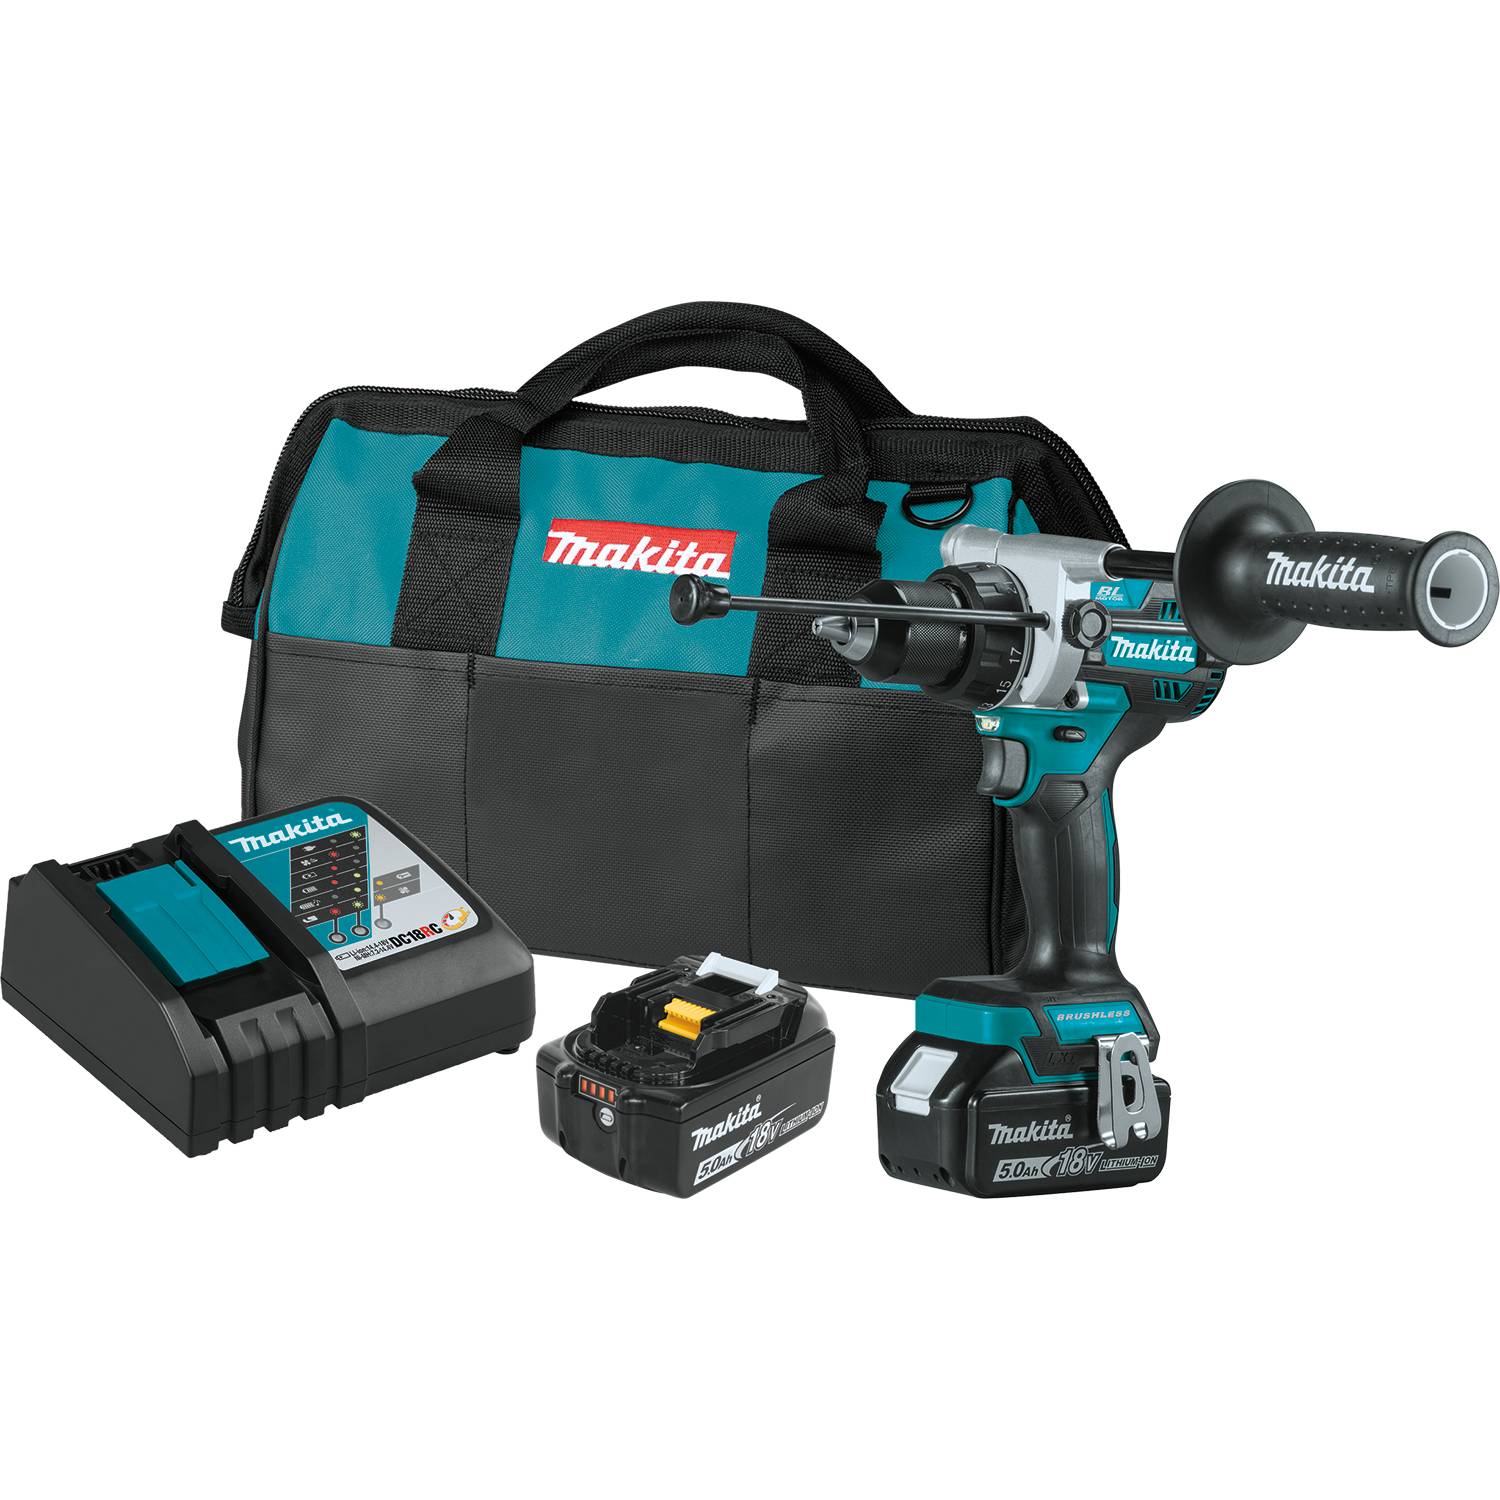 Makita 18V LXT Brushless Cordless 1/2 Inch Hammer Driver-Drill Kit from Columbia Safety